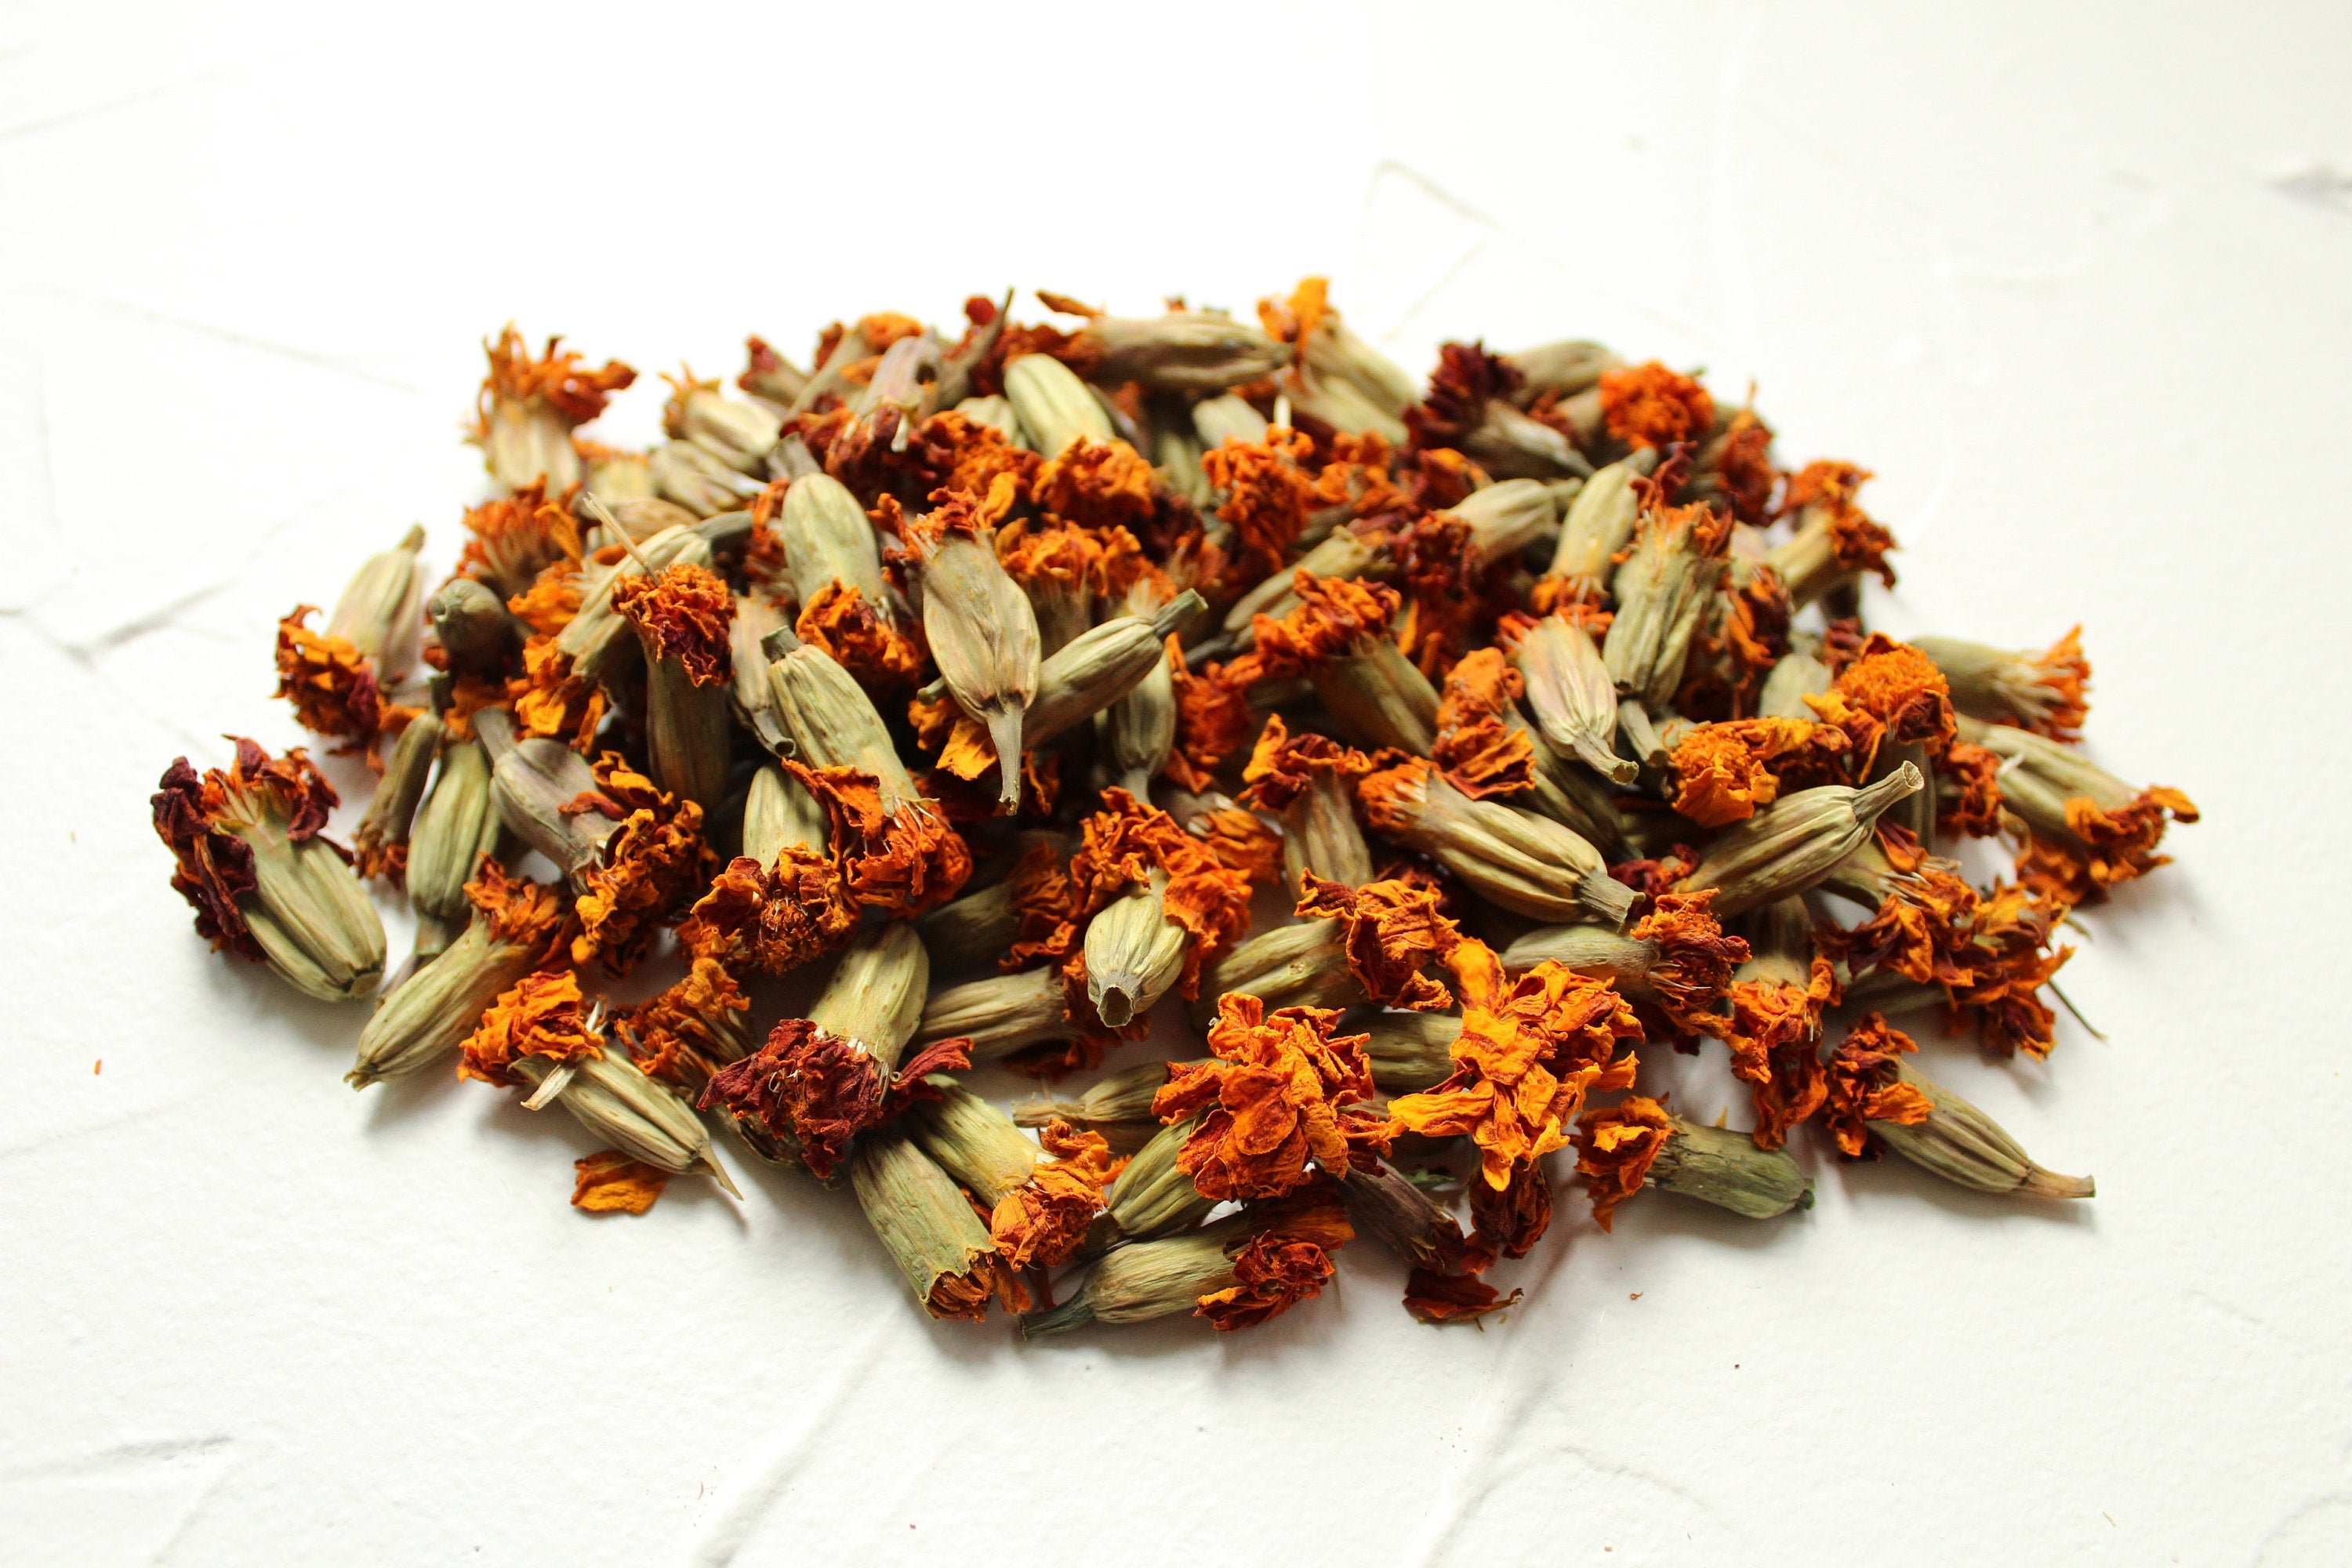 Marigold dried flowers, French marigold, High Quality, Natural, Organic, Biodegraddable, Wedding, Craft, Edible, Confetti, Wedding toss